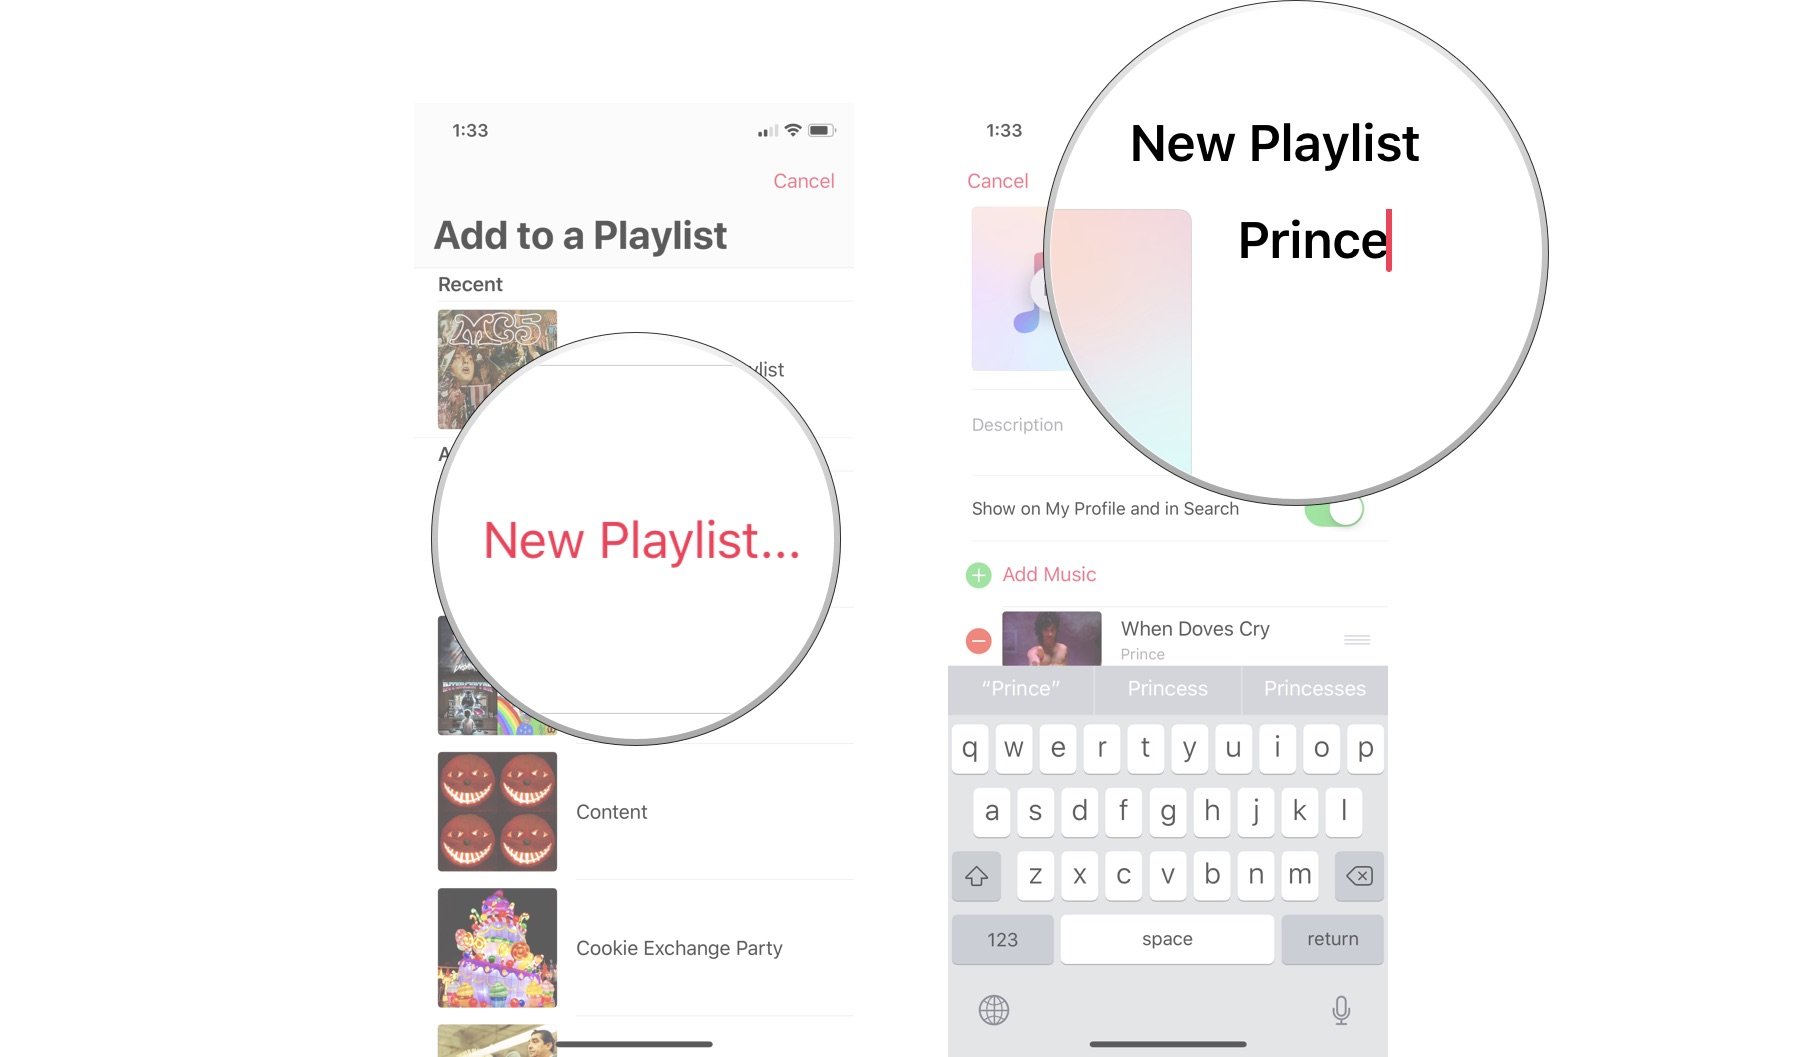 New playlist in Apple Music: Select New Playlist, then name the playlist